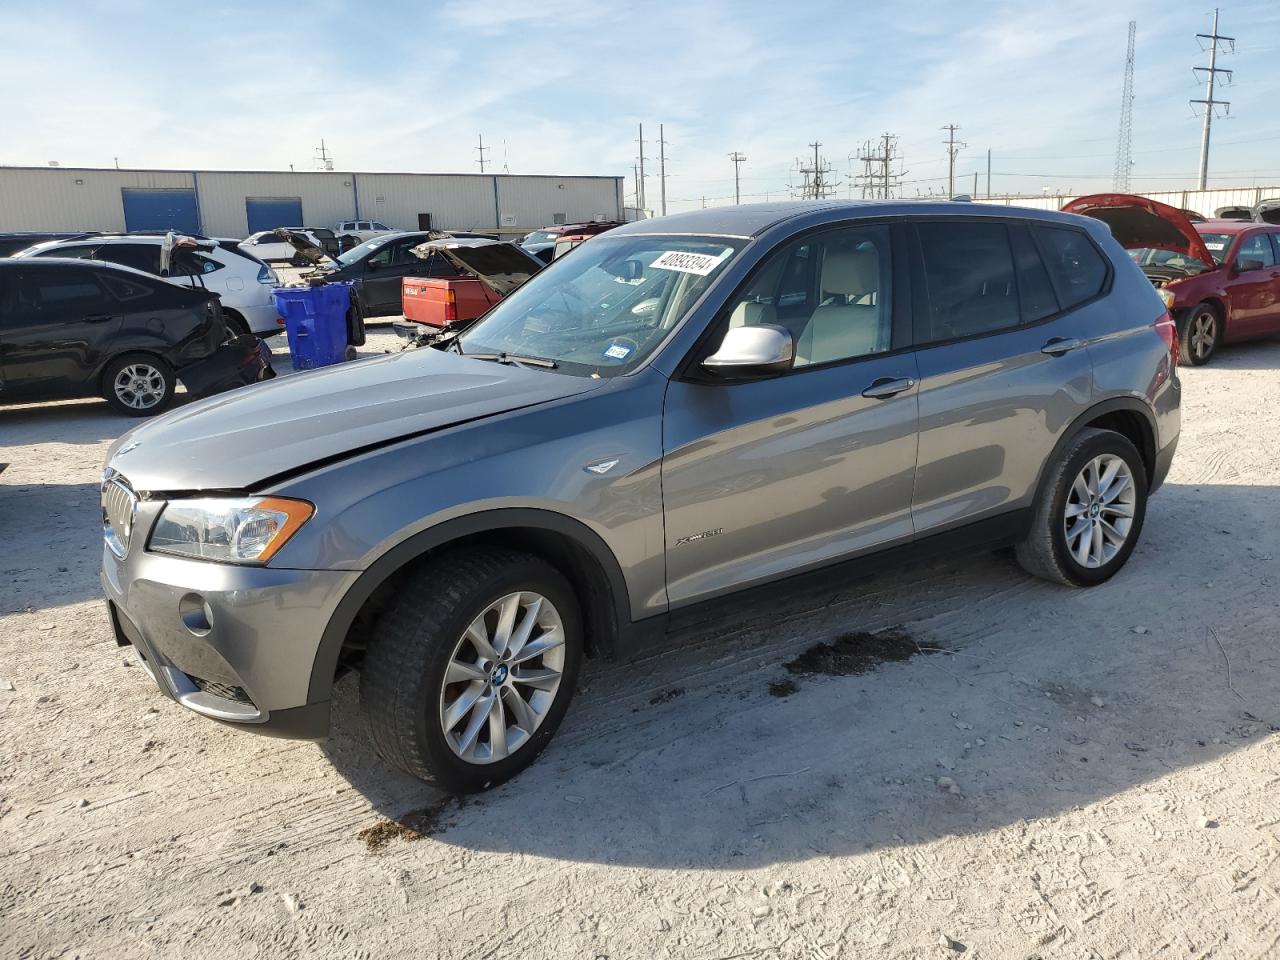 vin: 5UXWX9C50D0D08729 5UXWX9C50D0D08729 2013 bmw x3 2000 for Sale in 76052 3840, Tx - Ft. Worth, Haslet, USA